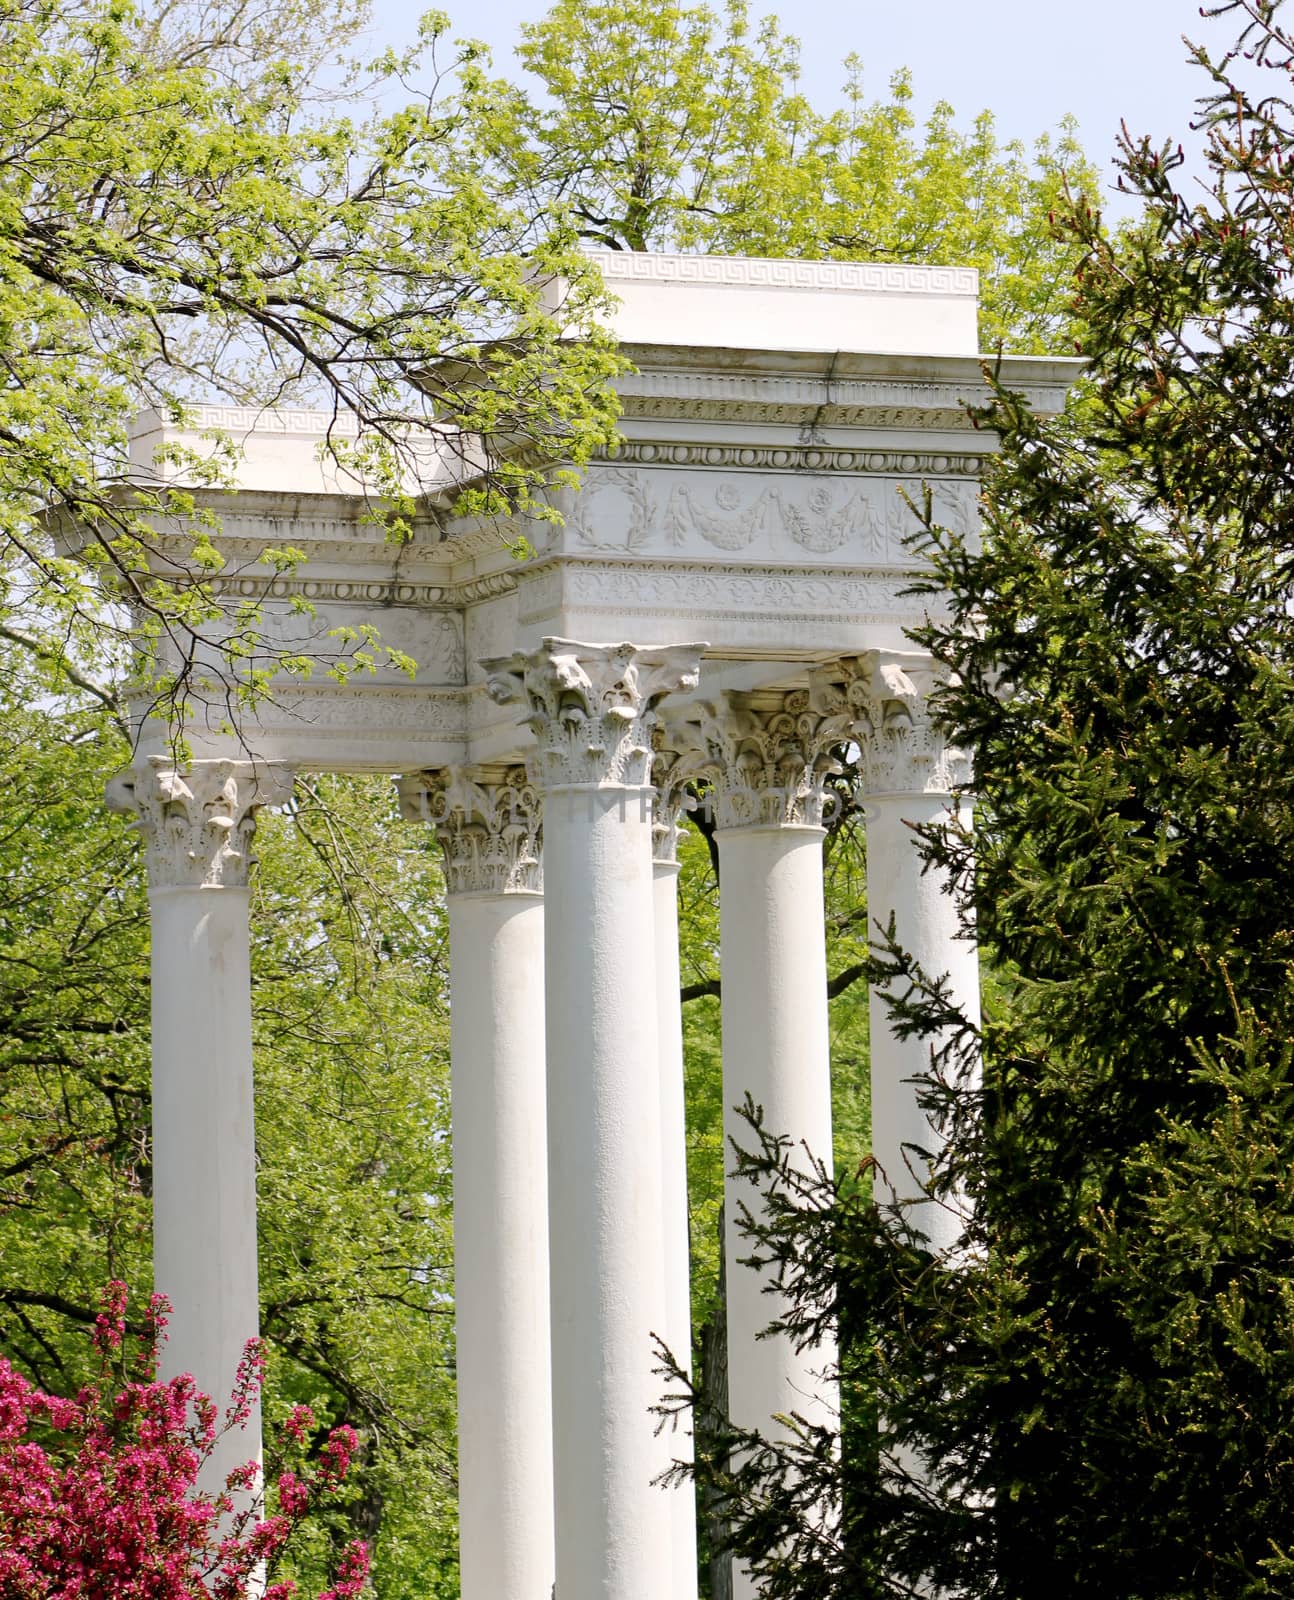 An aged and weathered stone monument featuring Corinthian columns, surrounded by trees, at Graceland Cemetery, Chicago, Illinois, USA